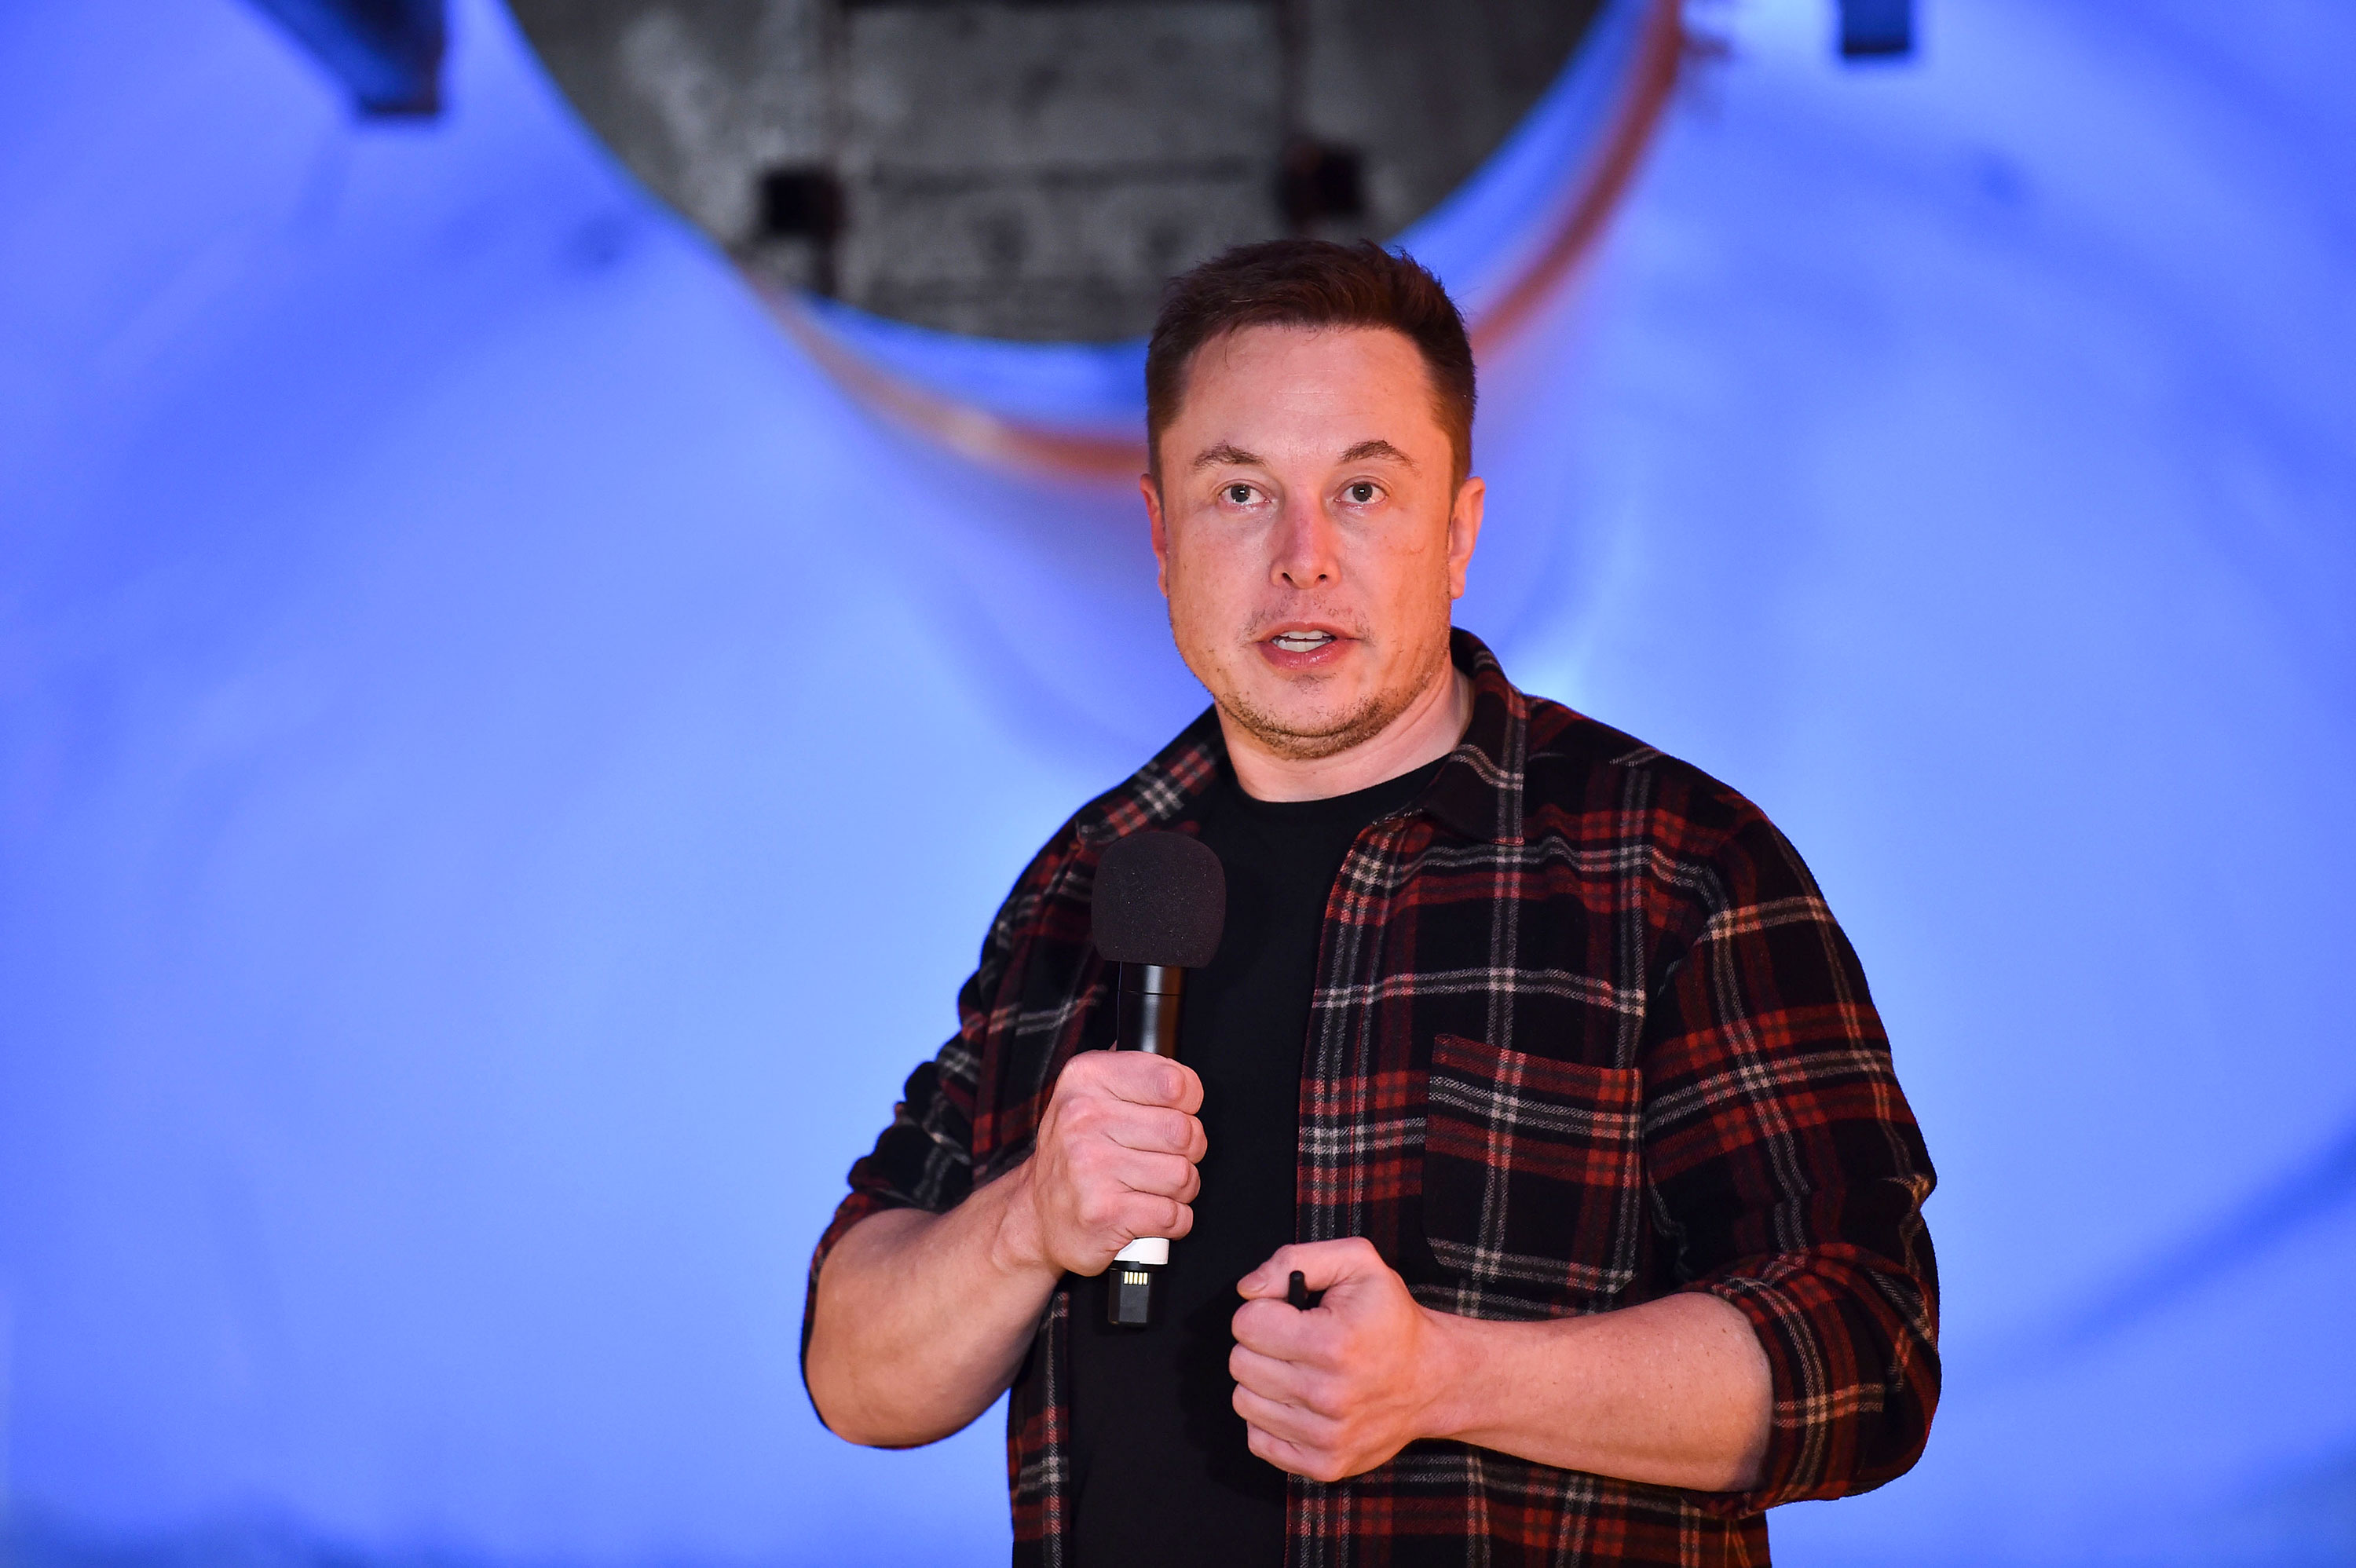 Elon Musk, co-founder and CEO of Tesla Inc., speaks during a unveiling ceremony for the Boring Company Hawthorne test tunnel in Hawthorne, south of Los Angeles, California on December 18, 2018.